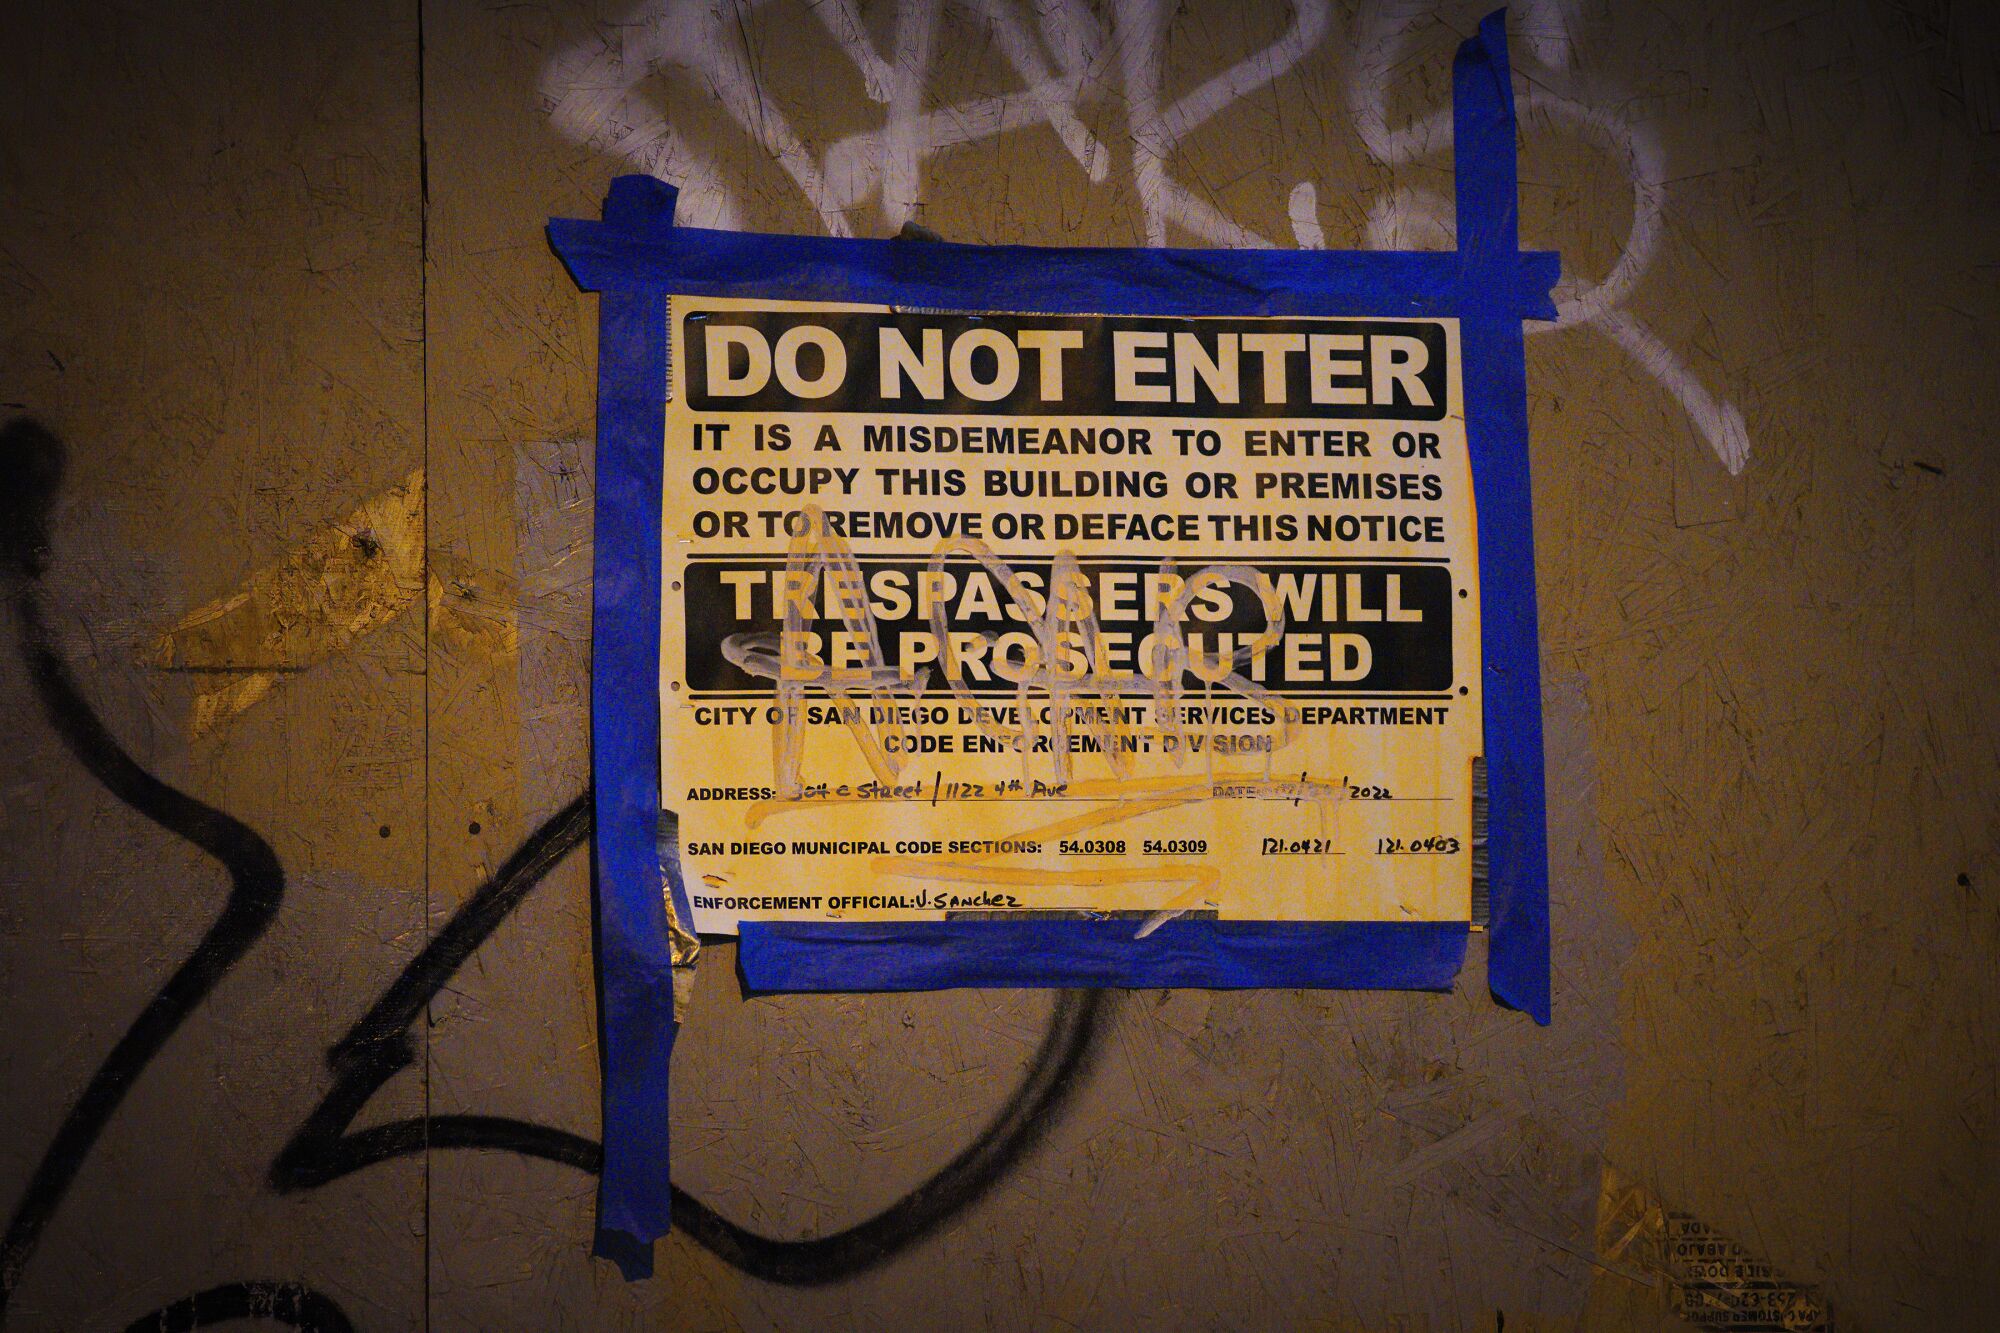 “Do Not Enter” signs were taped on the exterior walls of the California Theatre property in downtown.